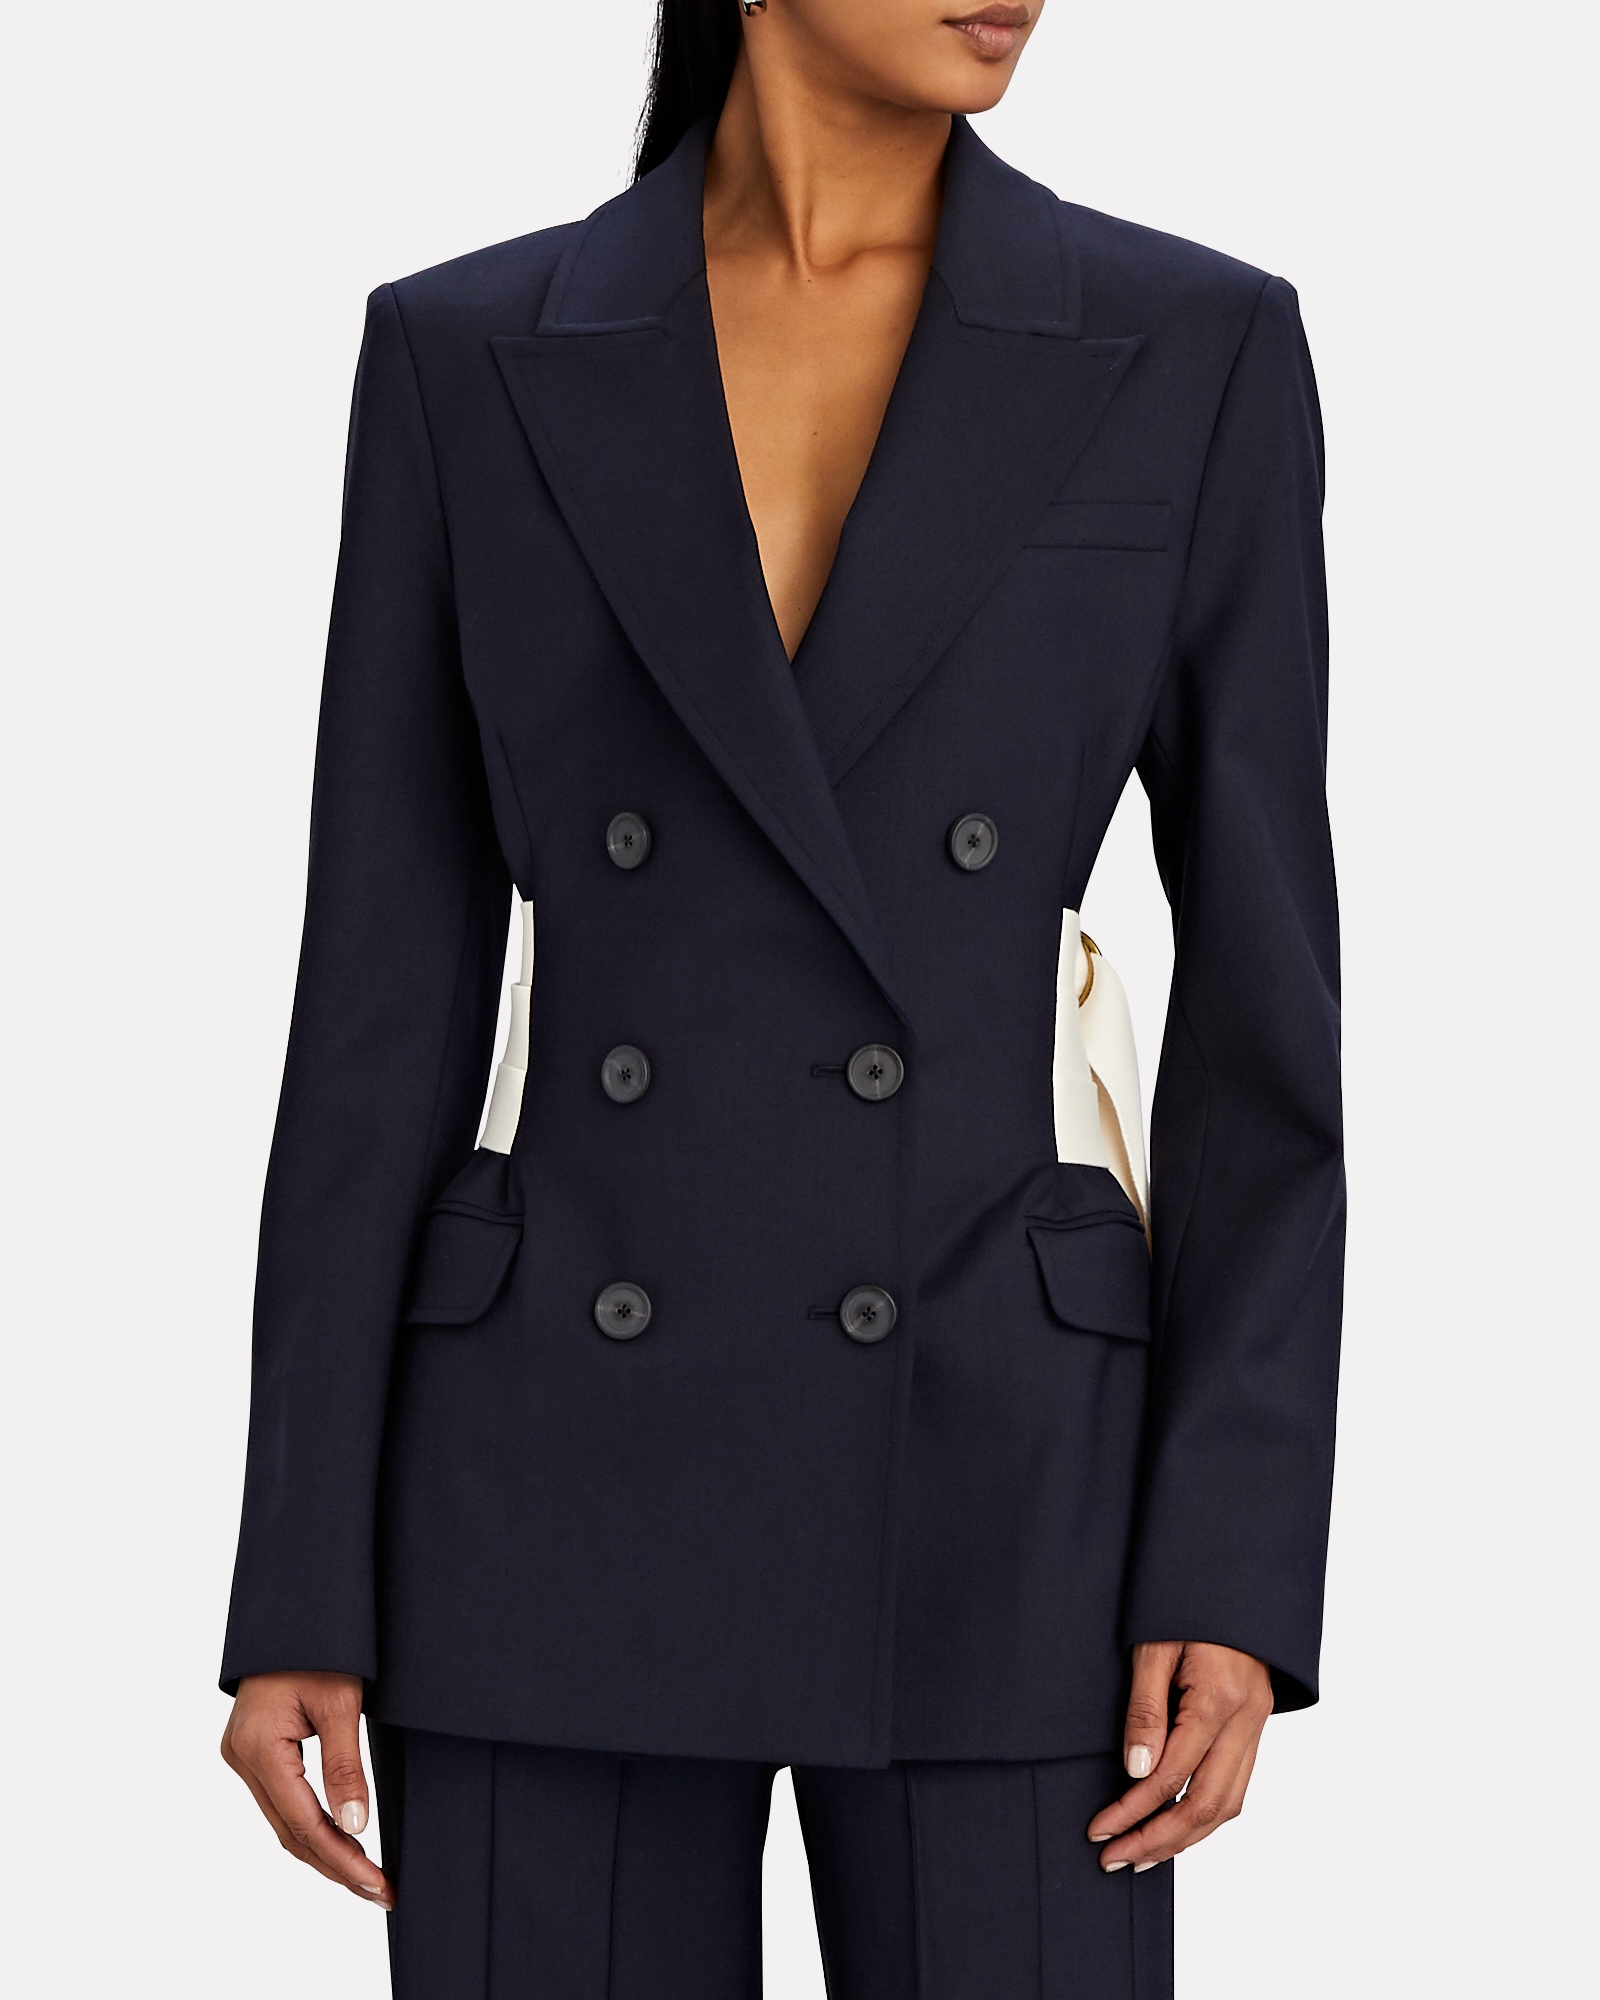 Monse Triple Belted Double-Breasted Blazer | INTERMIX®